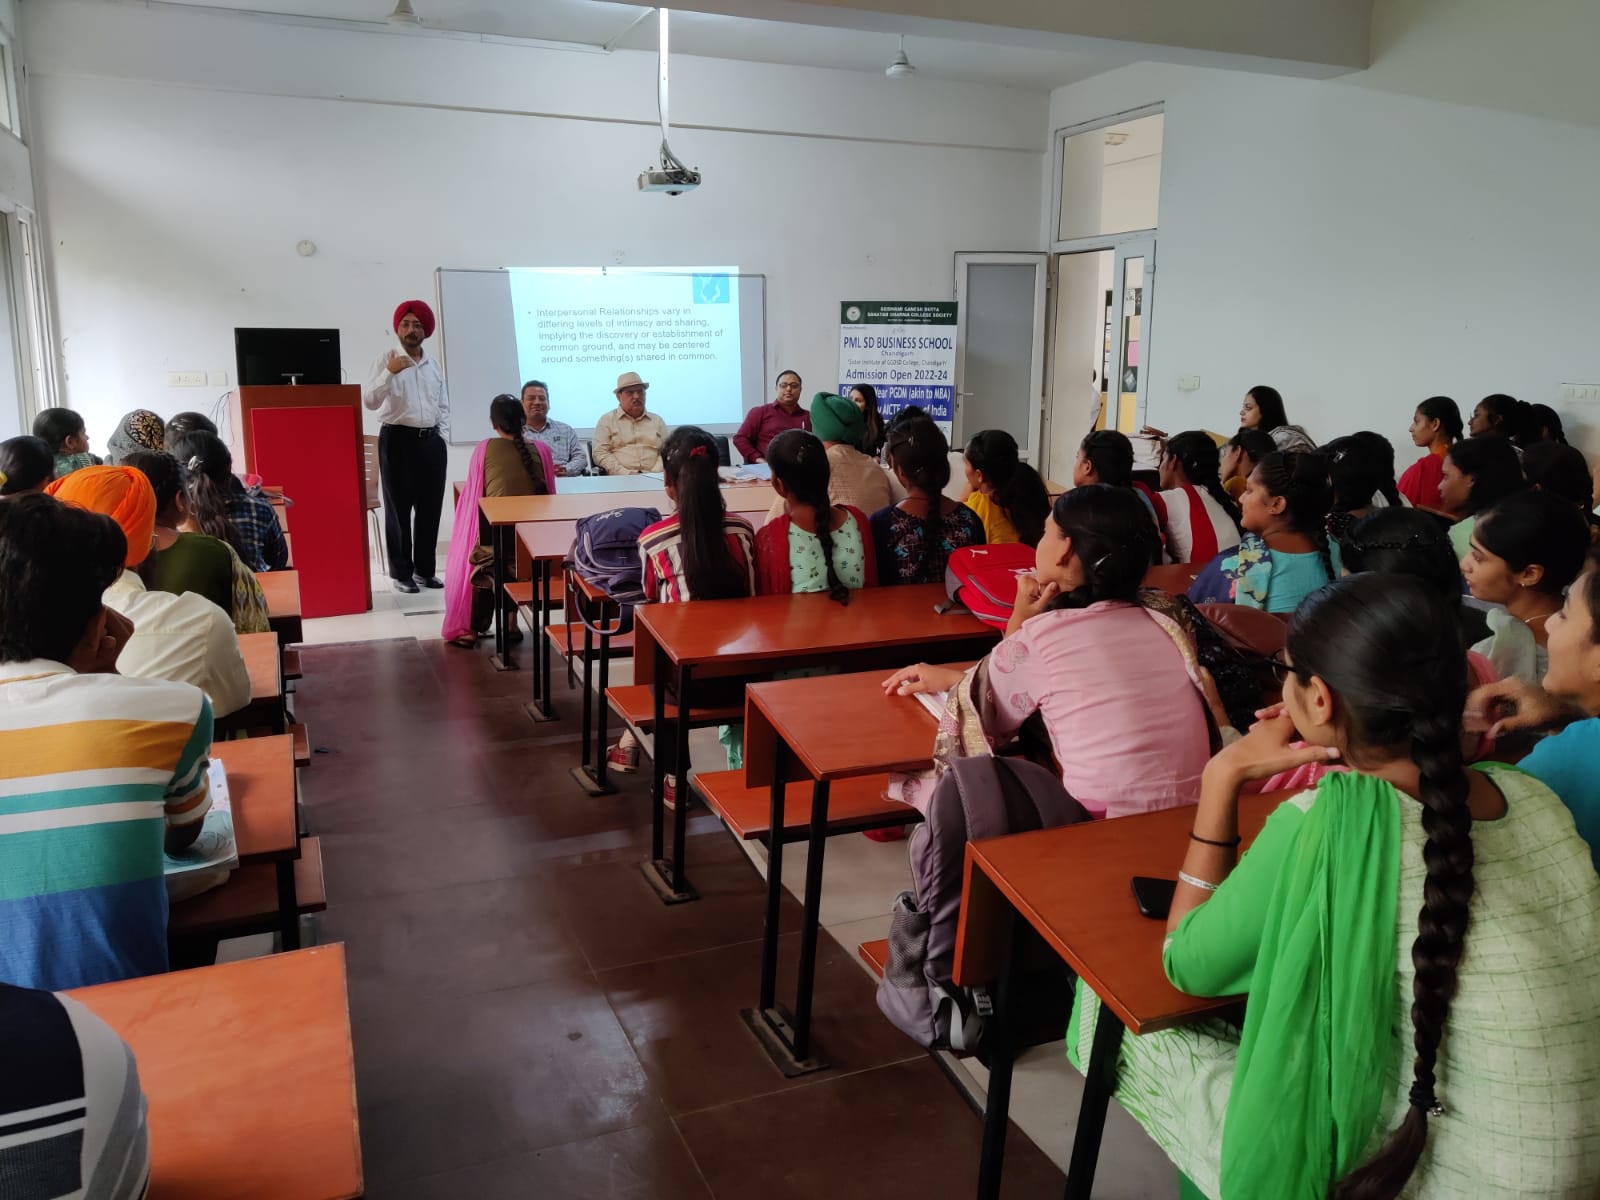 Admission Outreach at GGDSD College, Kheri Gurna, Punjab, May 17, 2022, Admission Team, PML SD Business School